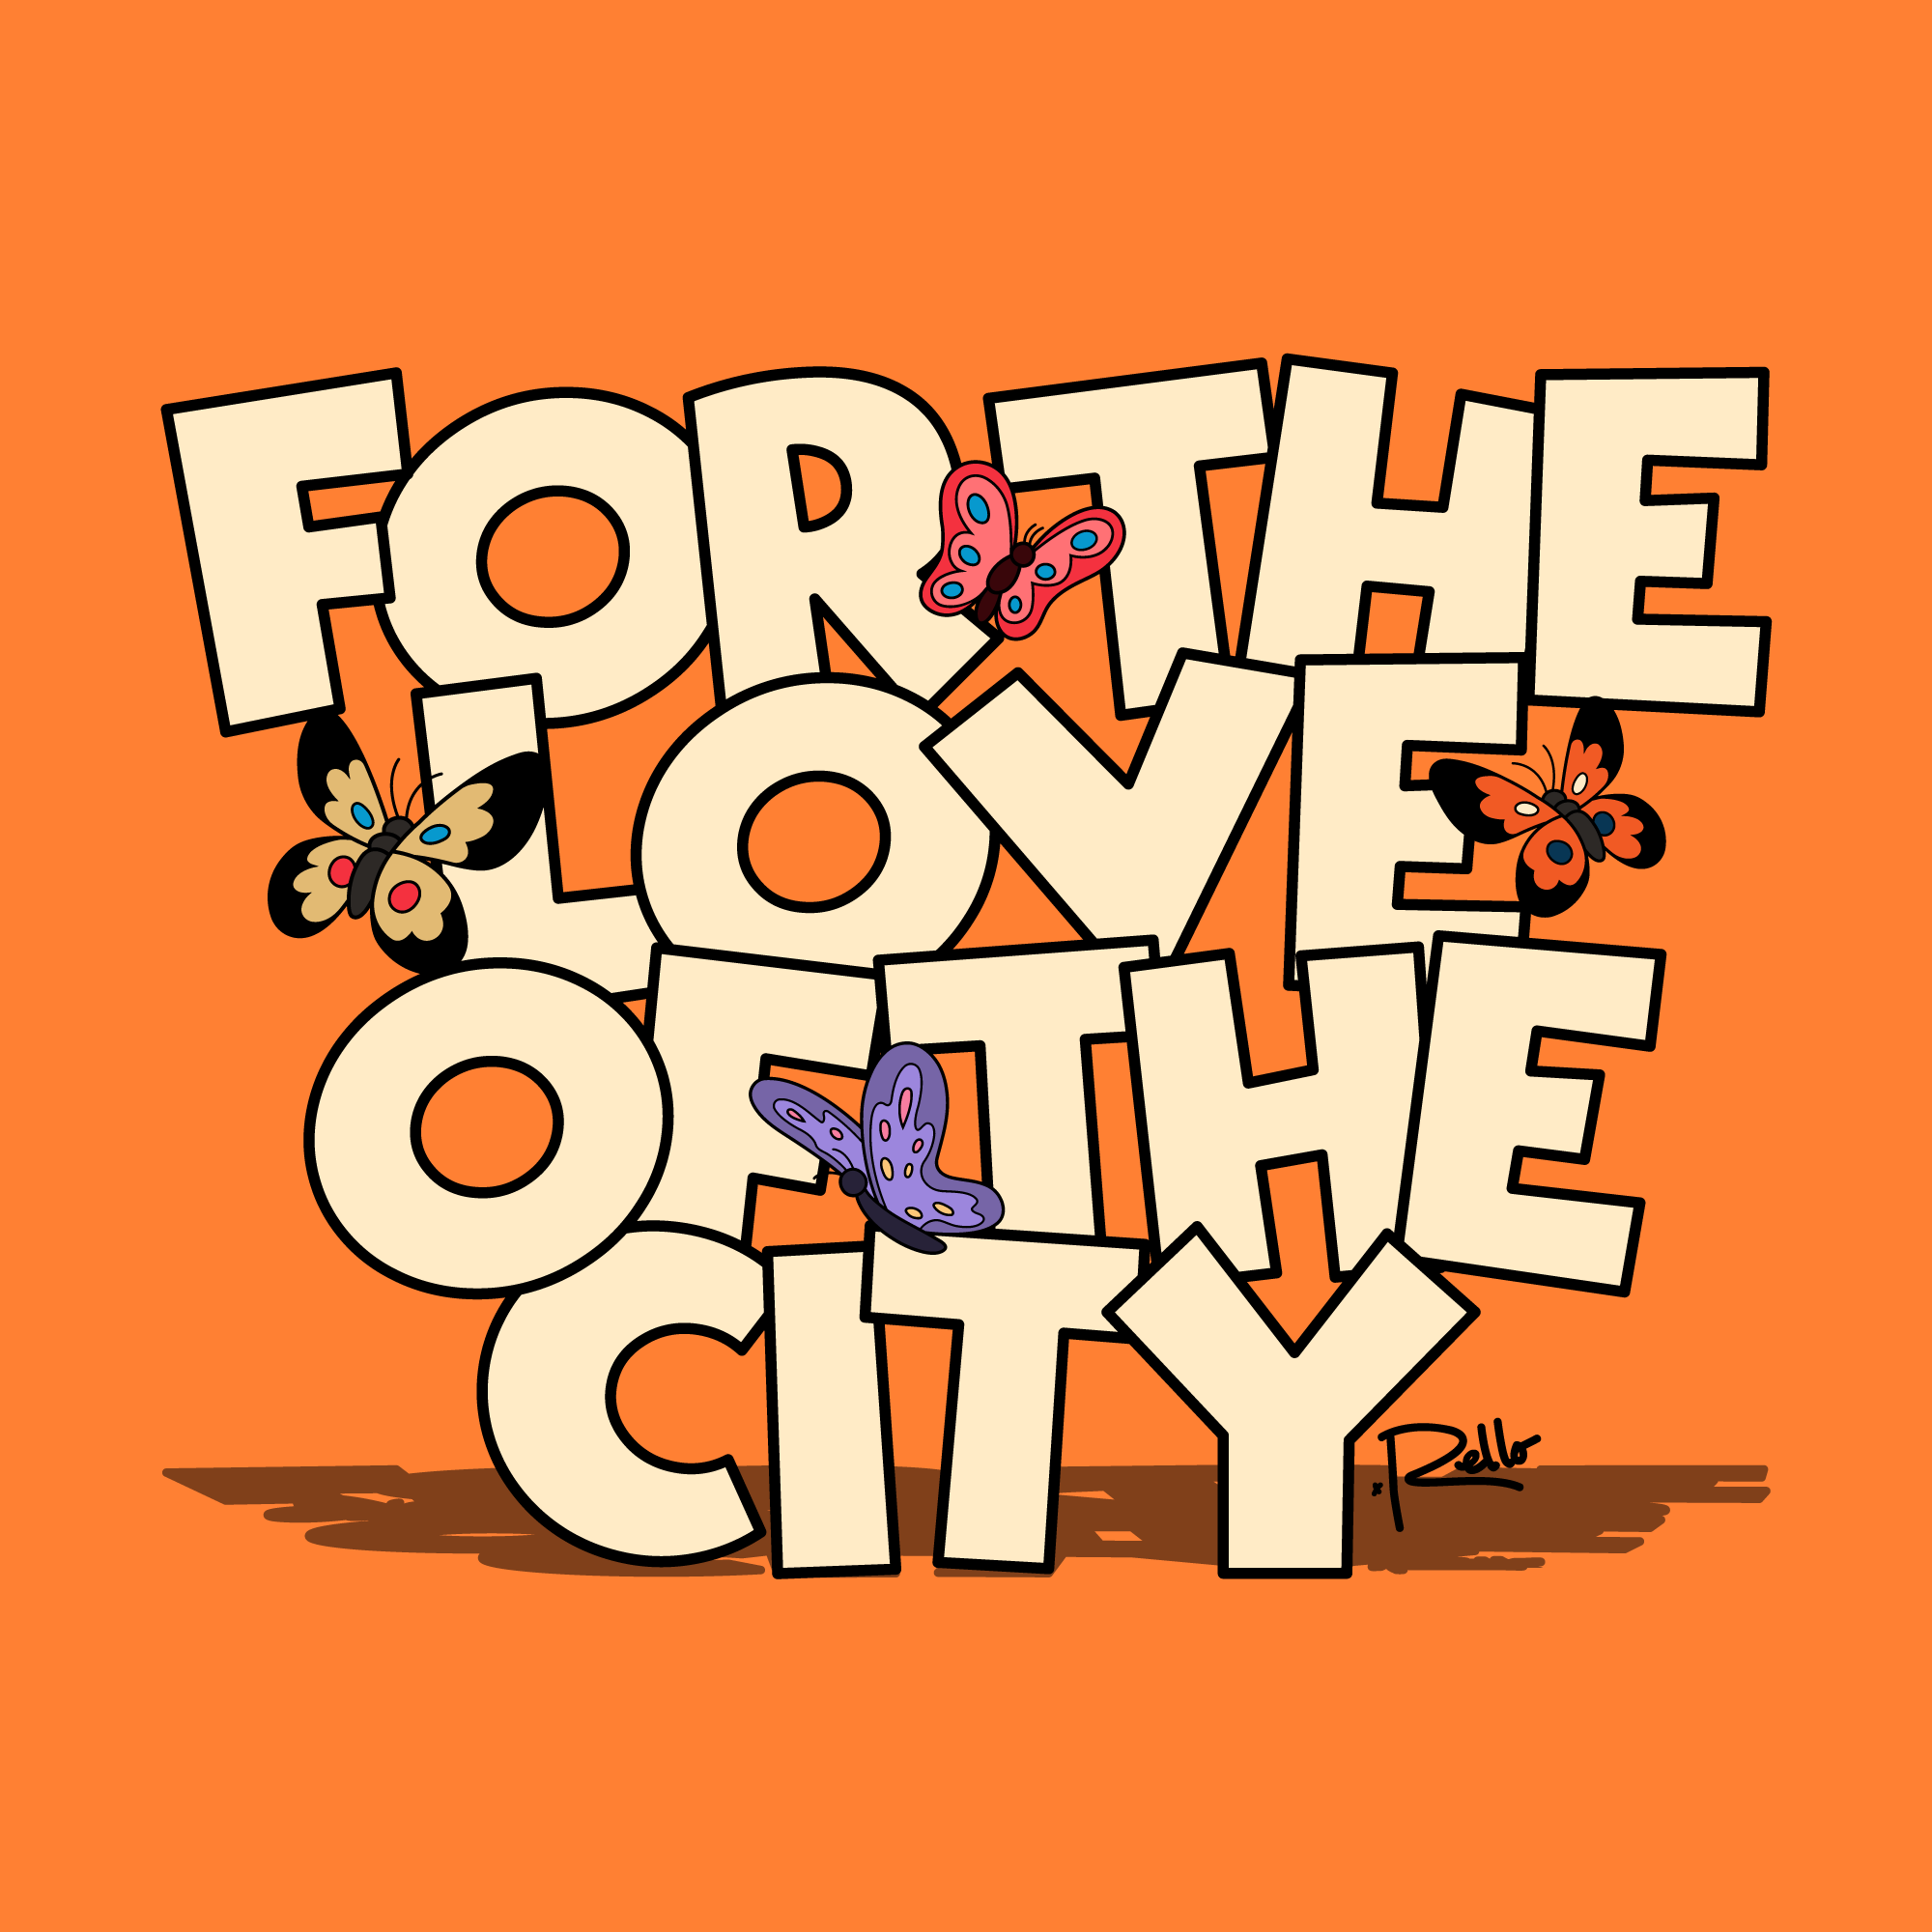 For the Love of the City